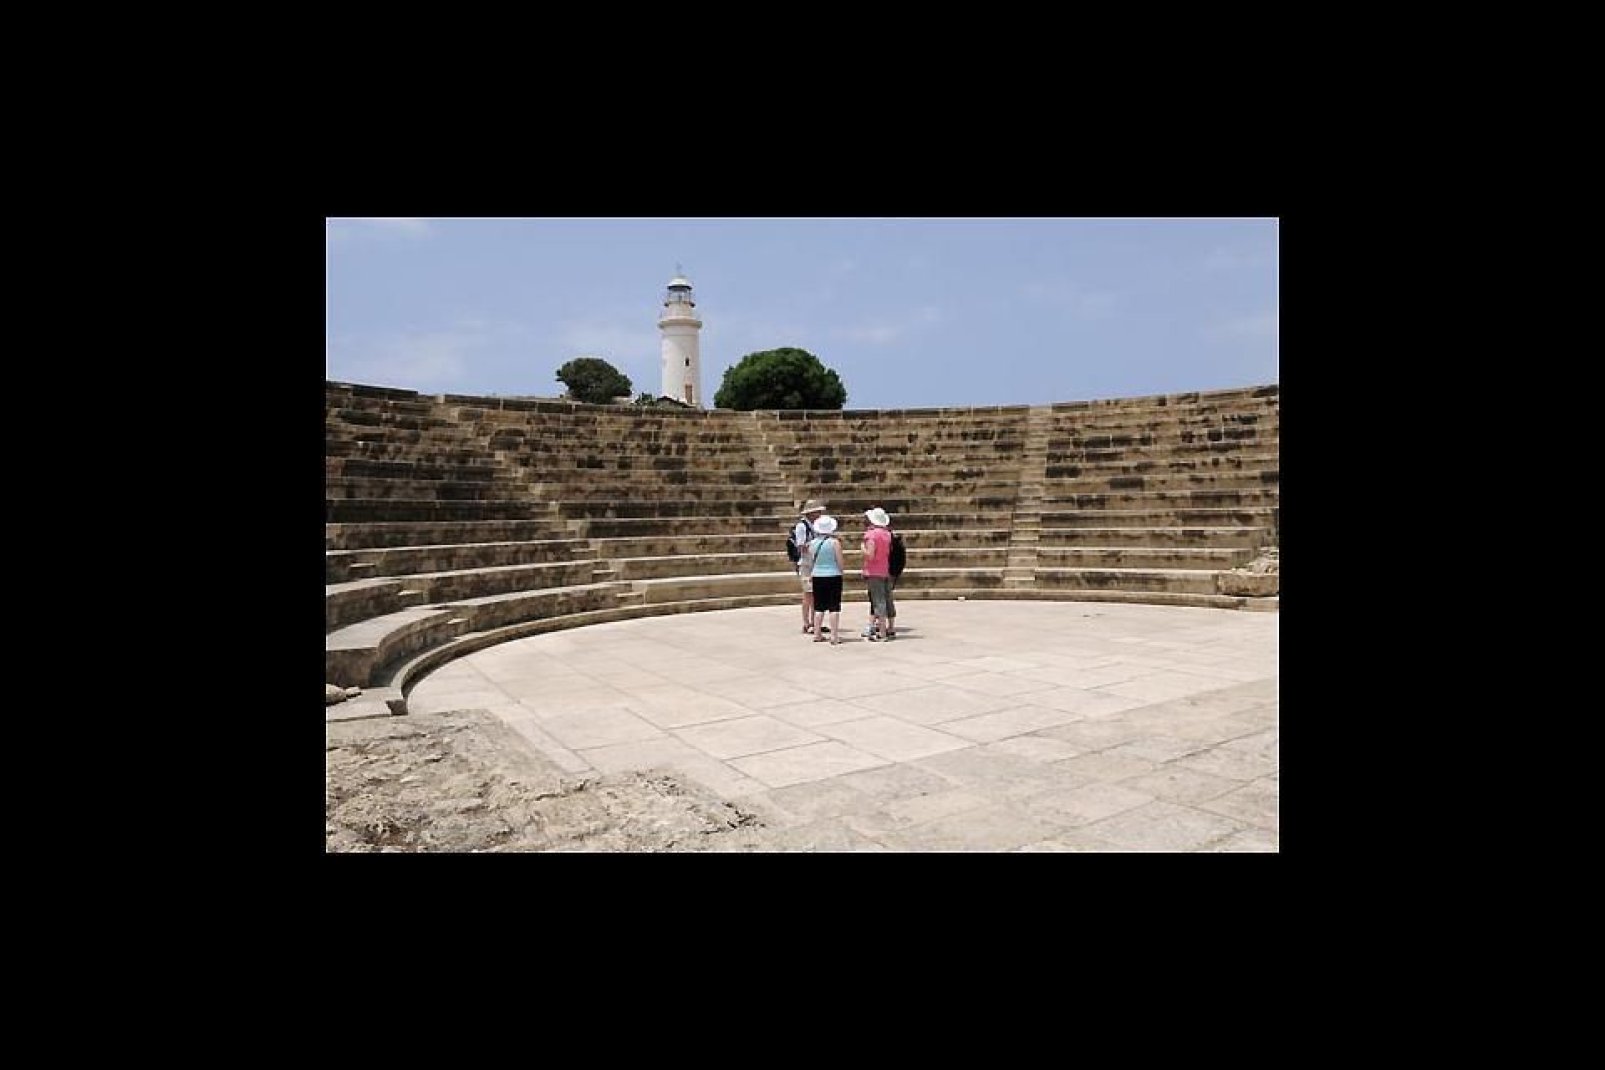 The vast archaeological site of the ancient city of Nea Paphos adjoins the modern city. This is a must-see.